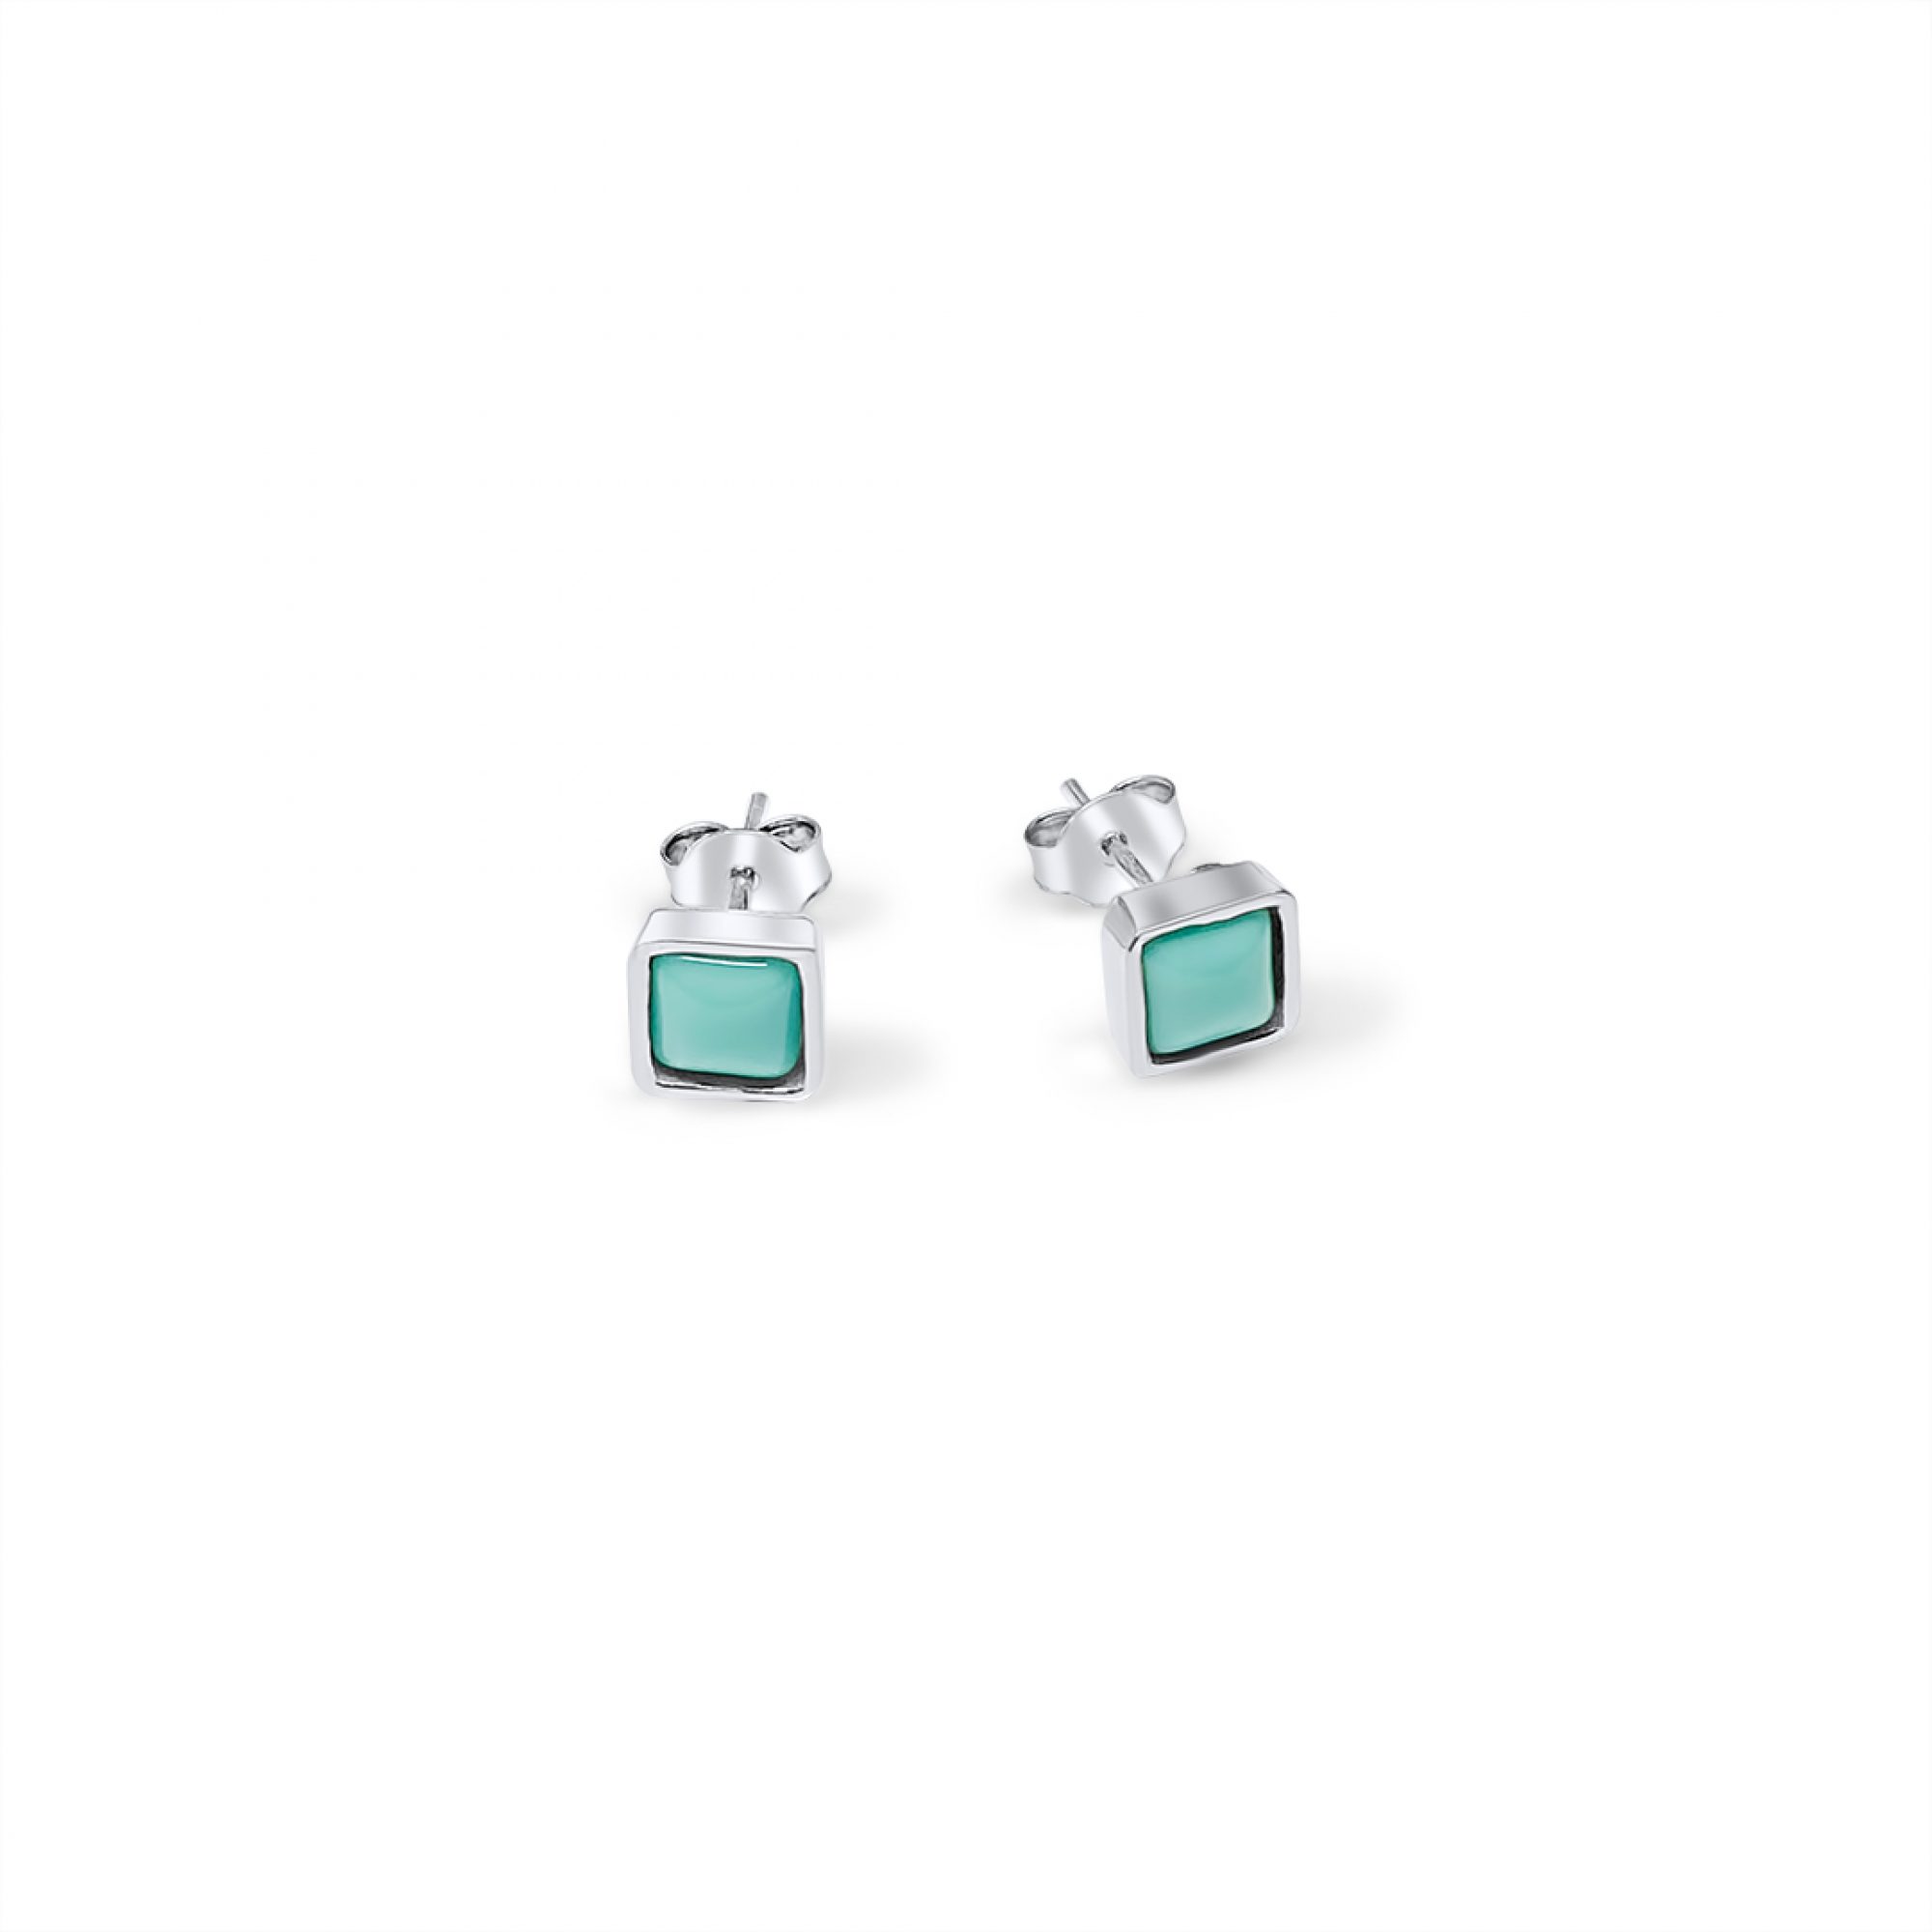 Silver stud earrings with turquoise stones